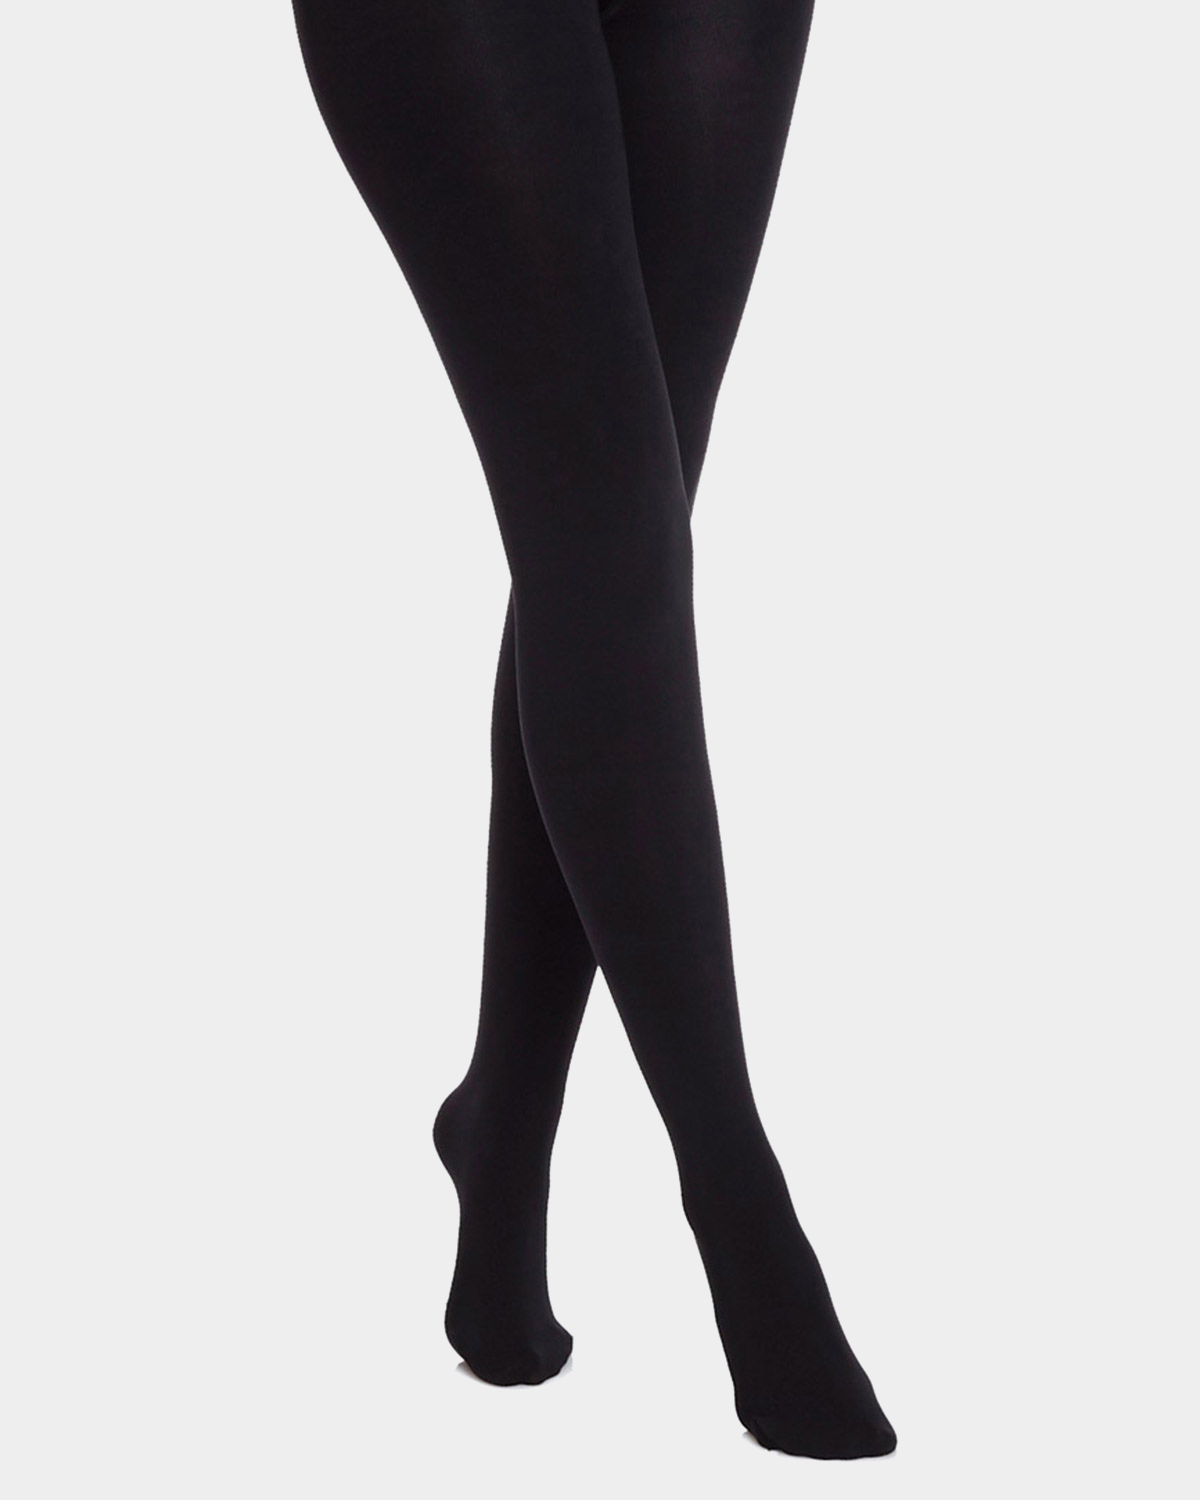 Buy Girls' 300 Denier Opaque Warm Fleece Lined Tights - Thermal Winter  Tights (6-8, Black) at